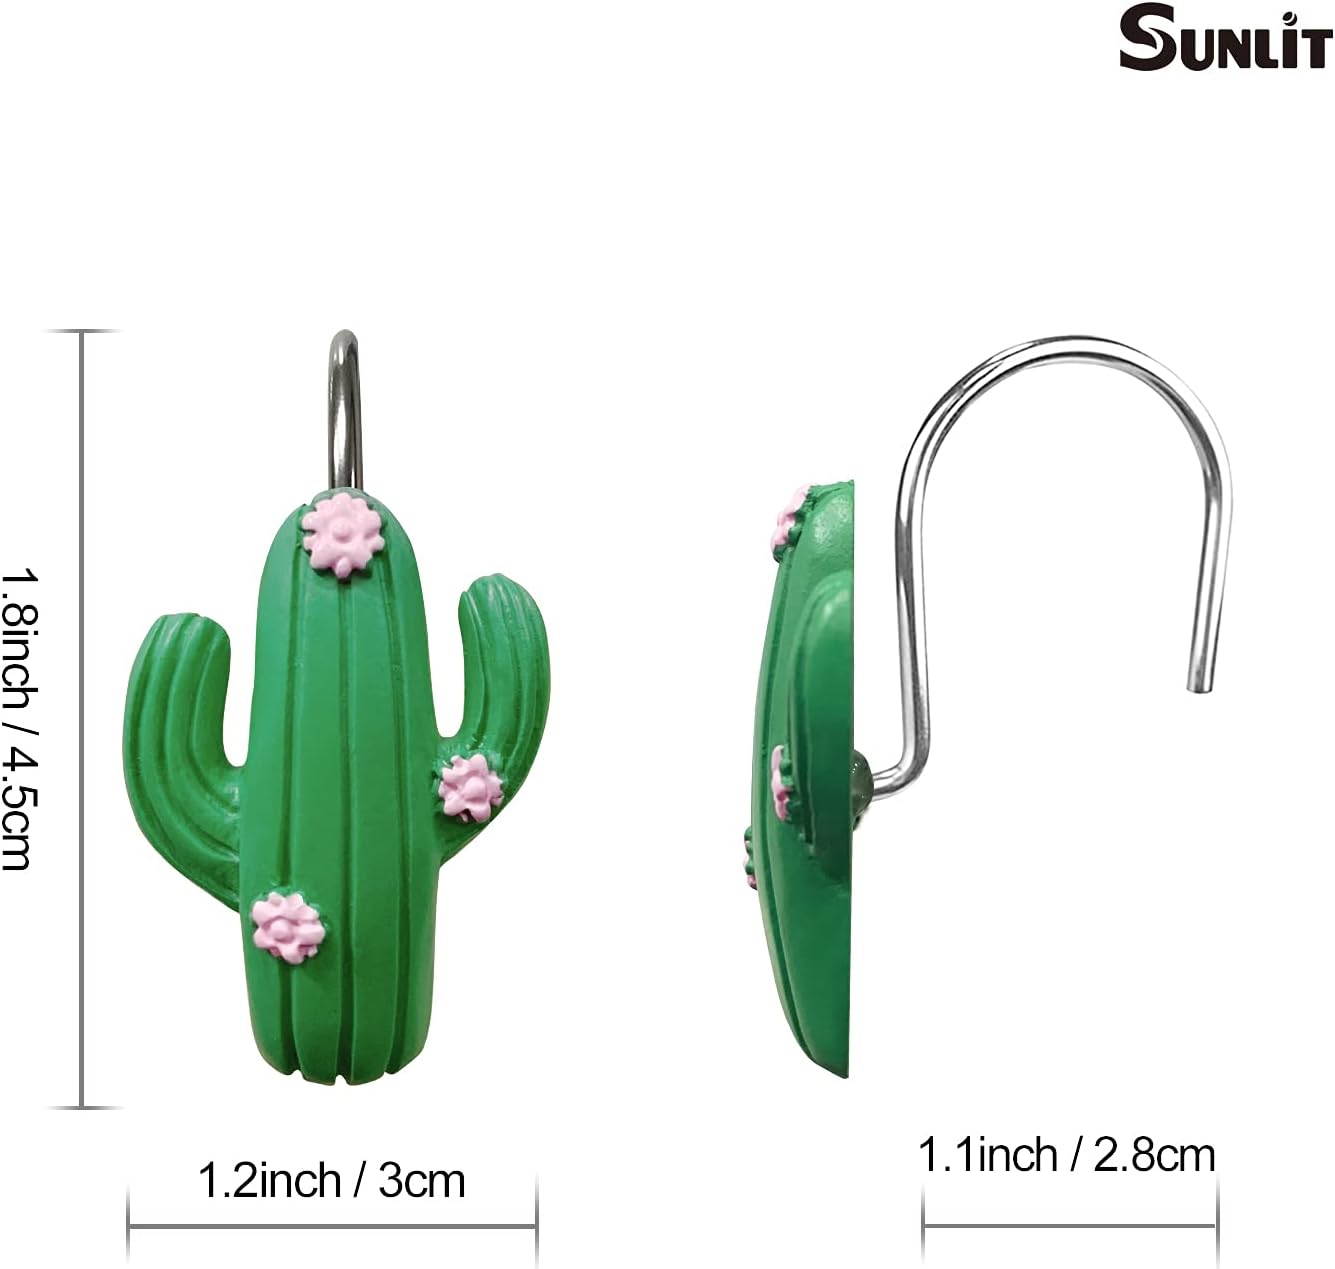 Sunlit Tropical Cactus Decorative Shower Curtain Hooks, Green Cactus Flowers Blossom Shower Curtain Rings, Resin, Summer Bathroom Decoration - 12 Pack